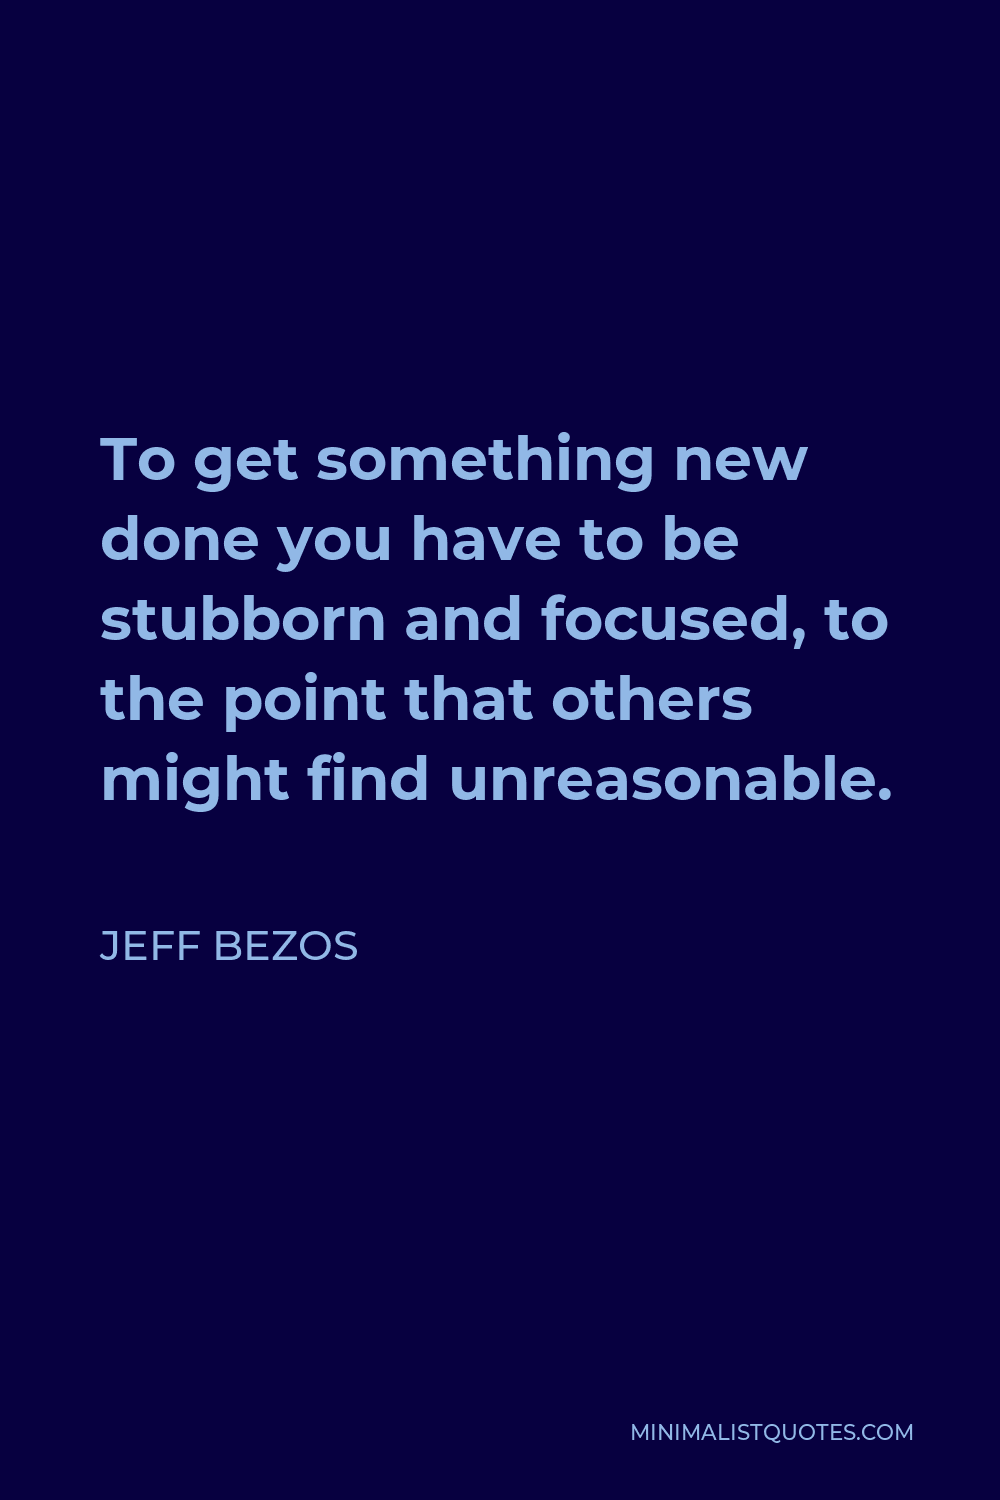 Jeff Bezos Quote - To get something new done you have to be stubborn and focused, to the point that others might find unreasonable.